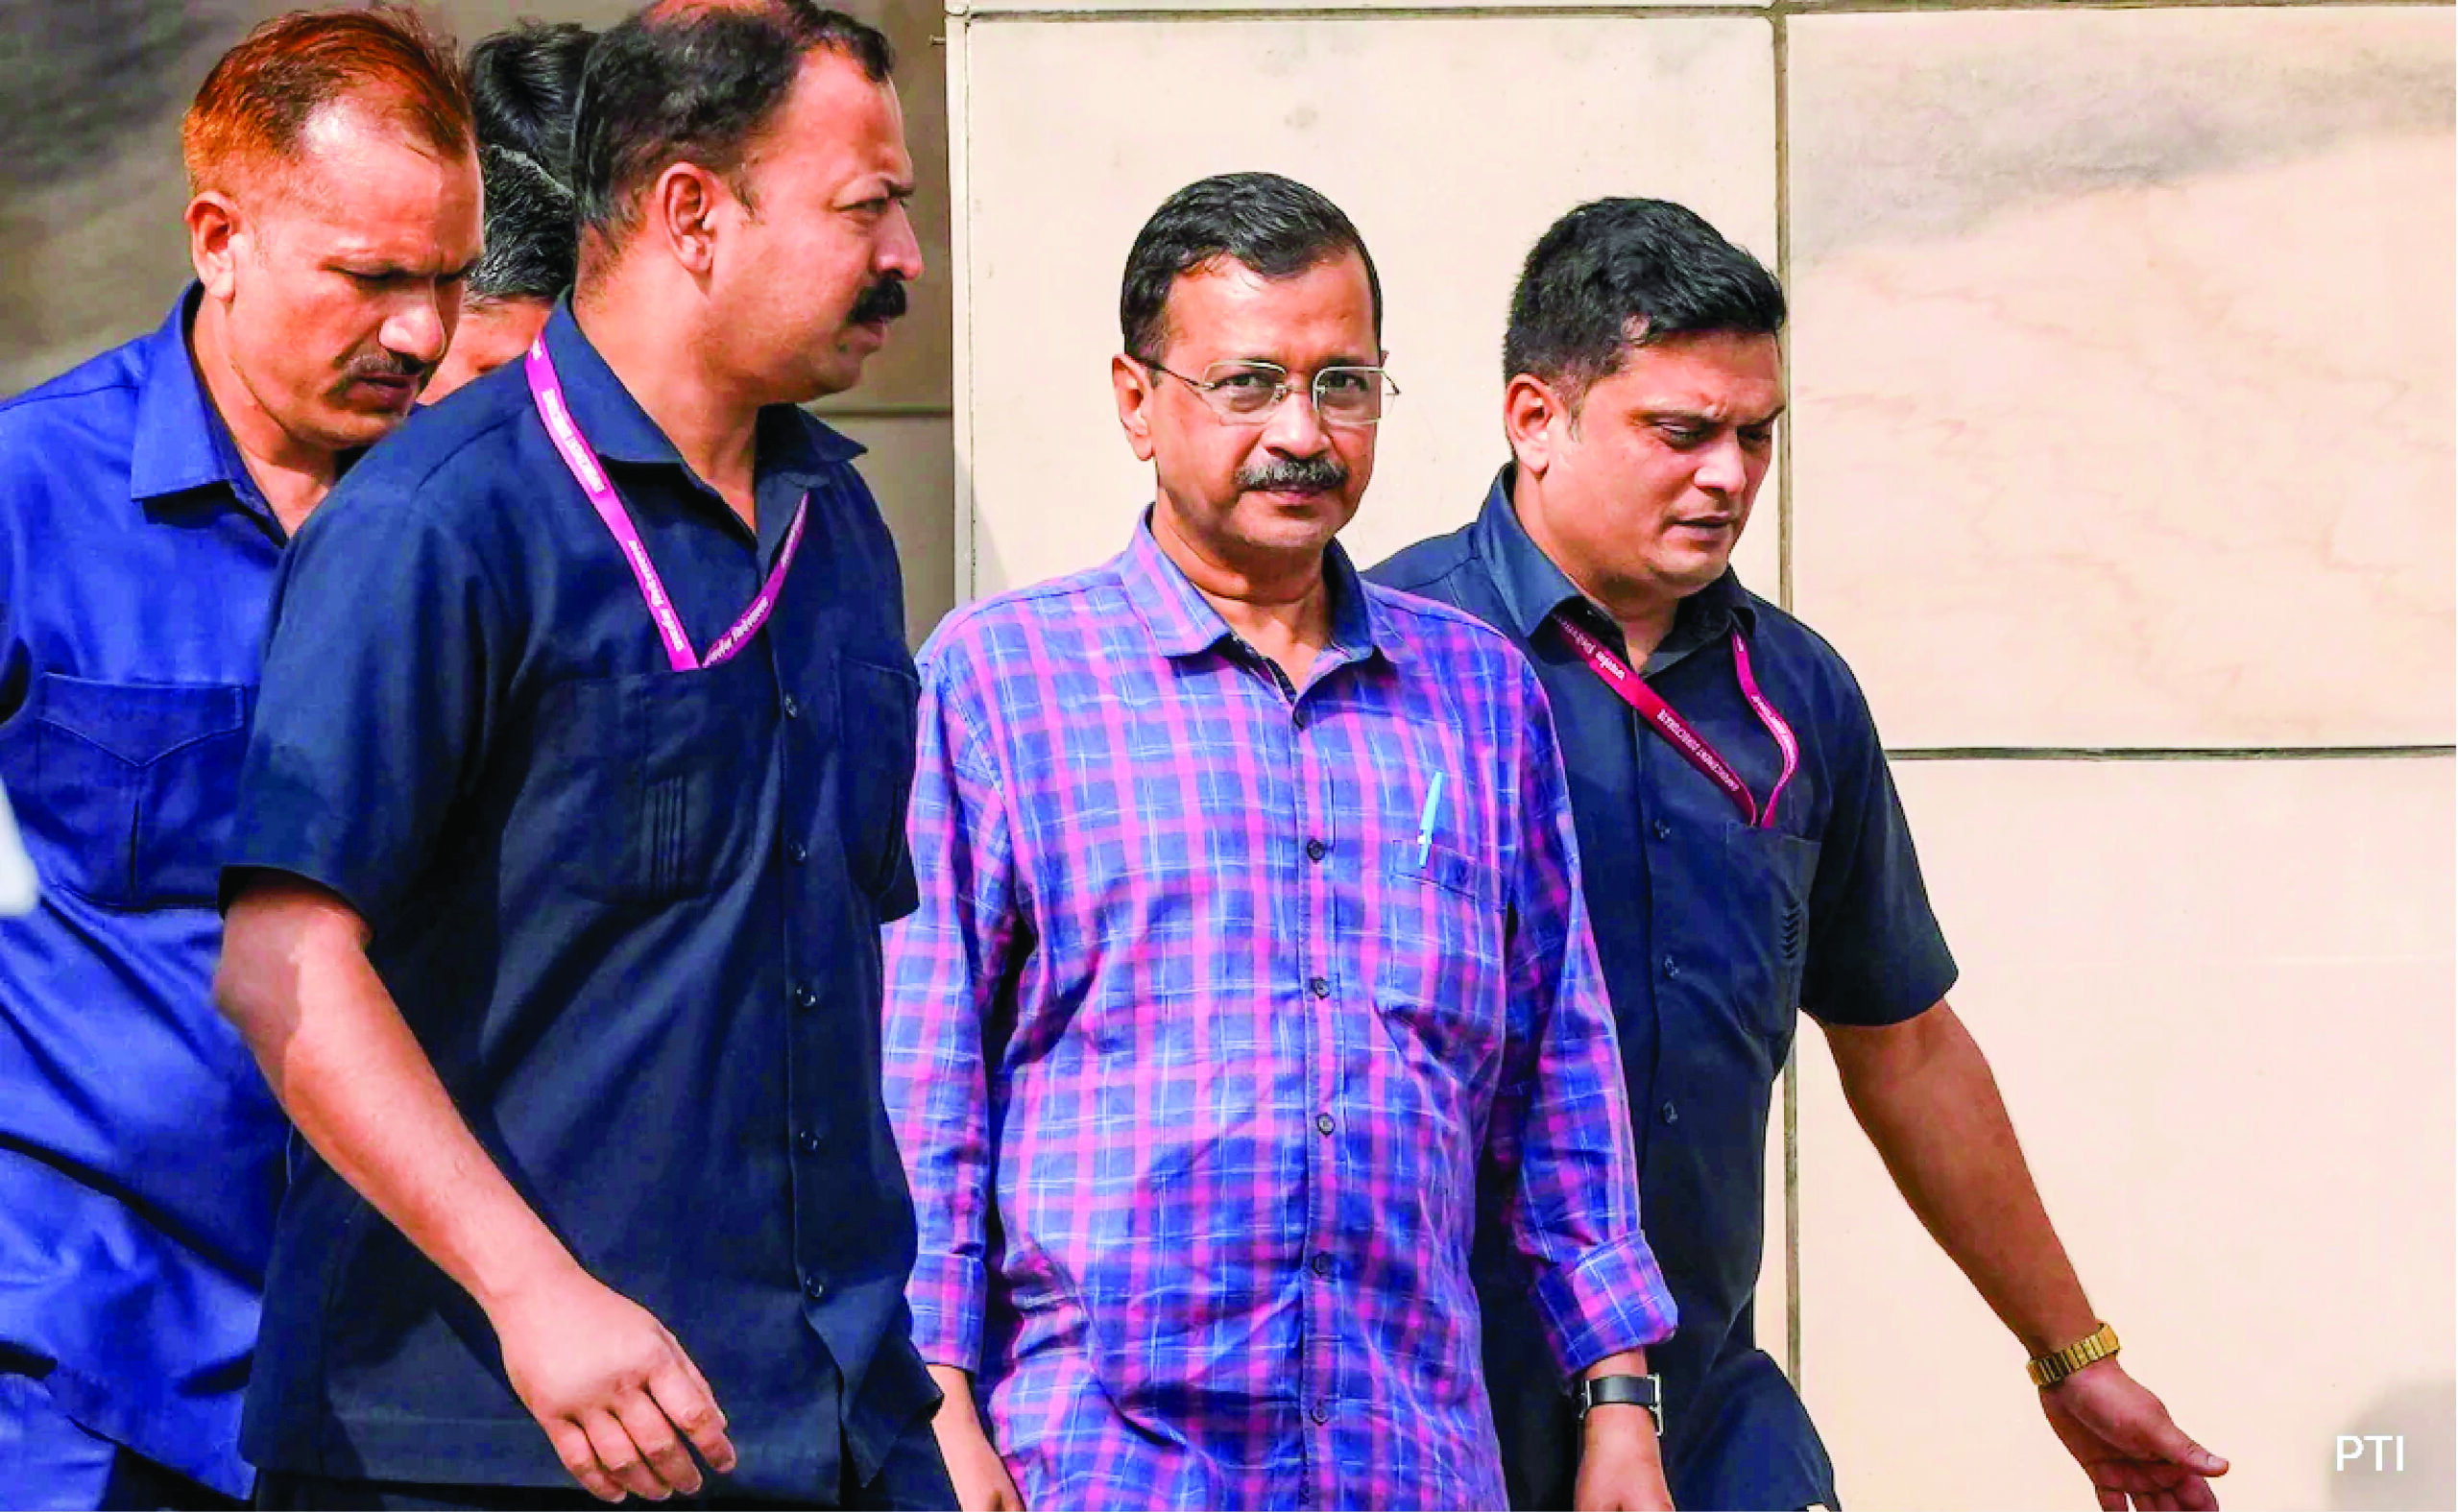 Insulin row: AIIMS doctors to examine Kejriwal on court order